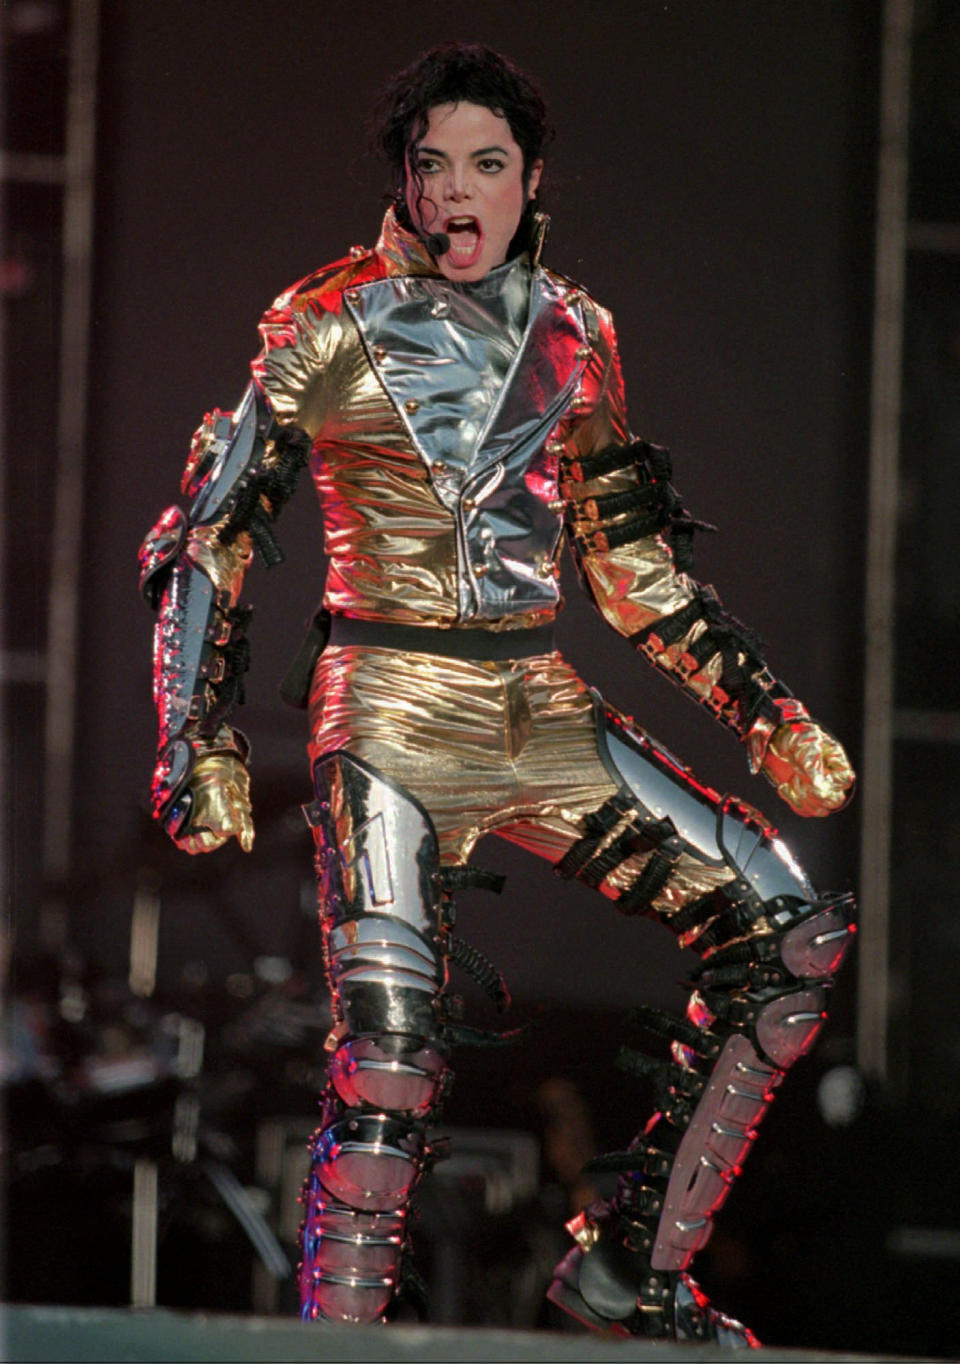 FILE - In this May 31, 1997 file photo, U.S. Popstar Michael Jackson performs during the opening concert of his "HIStory Tour Part II" across Germany and Europe at the Weserstadion in Bremen, North Germany. Jackson's earning potential may become an issue when a Los Angeles jury begins deliberating a negligent hiring lawsuit filed by the singer's mother, Katherine Jackson, against concert giant AEG Live LLC over her son's 2009 death. Witnesses have testified throughout the 21-week trial that the pop superstar was planning a new career in movies after completing his "This Is It" tour that was scheduled to begin in July 2009. (AP Photo/Joerg Sarbach)